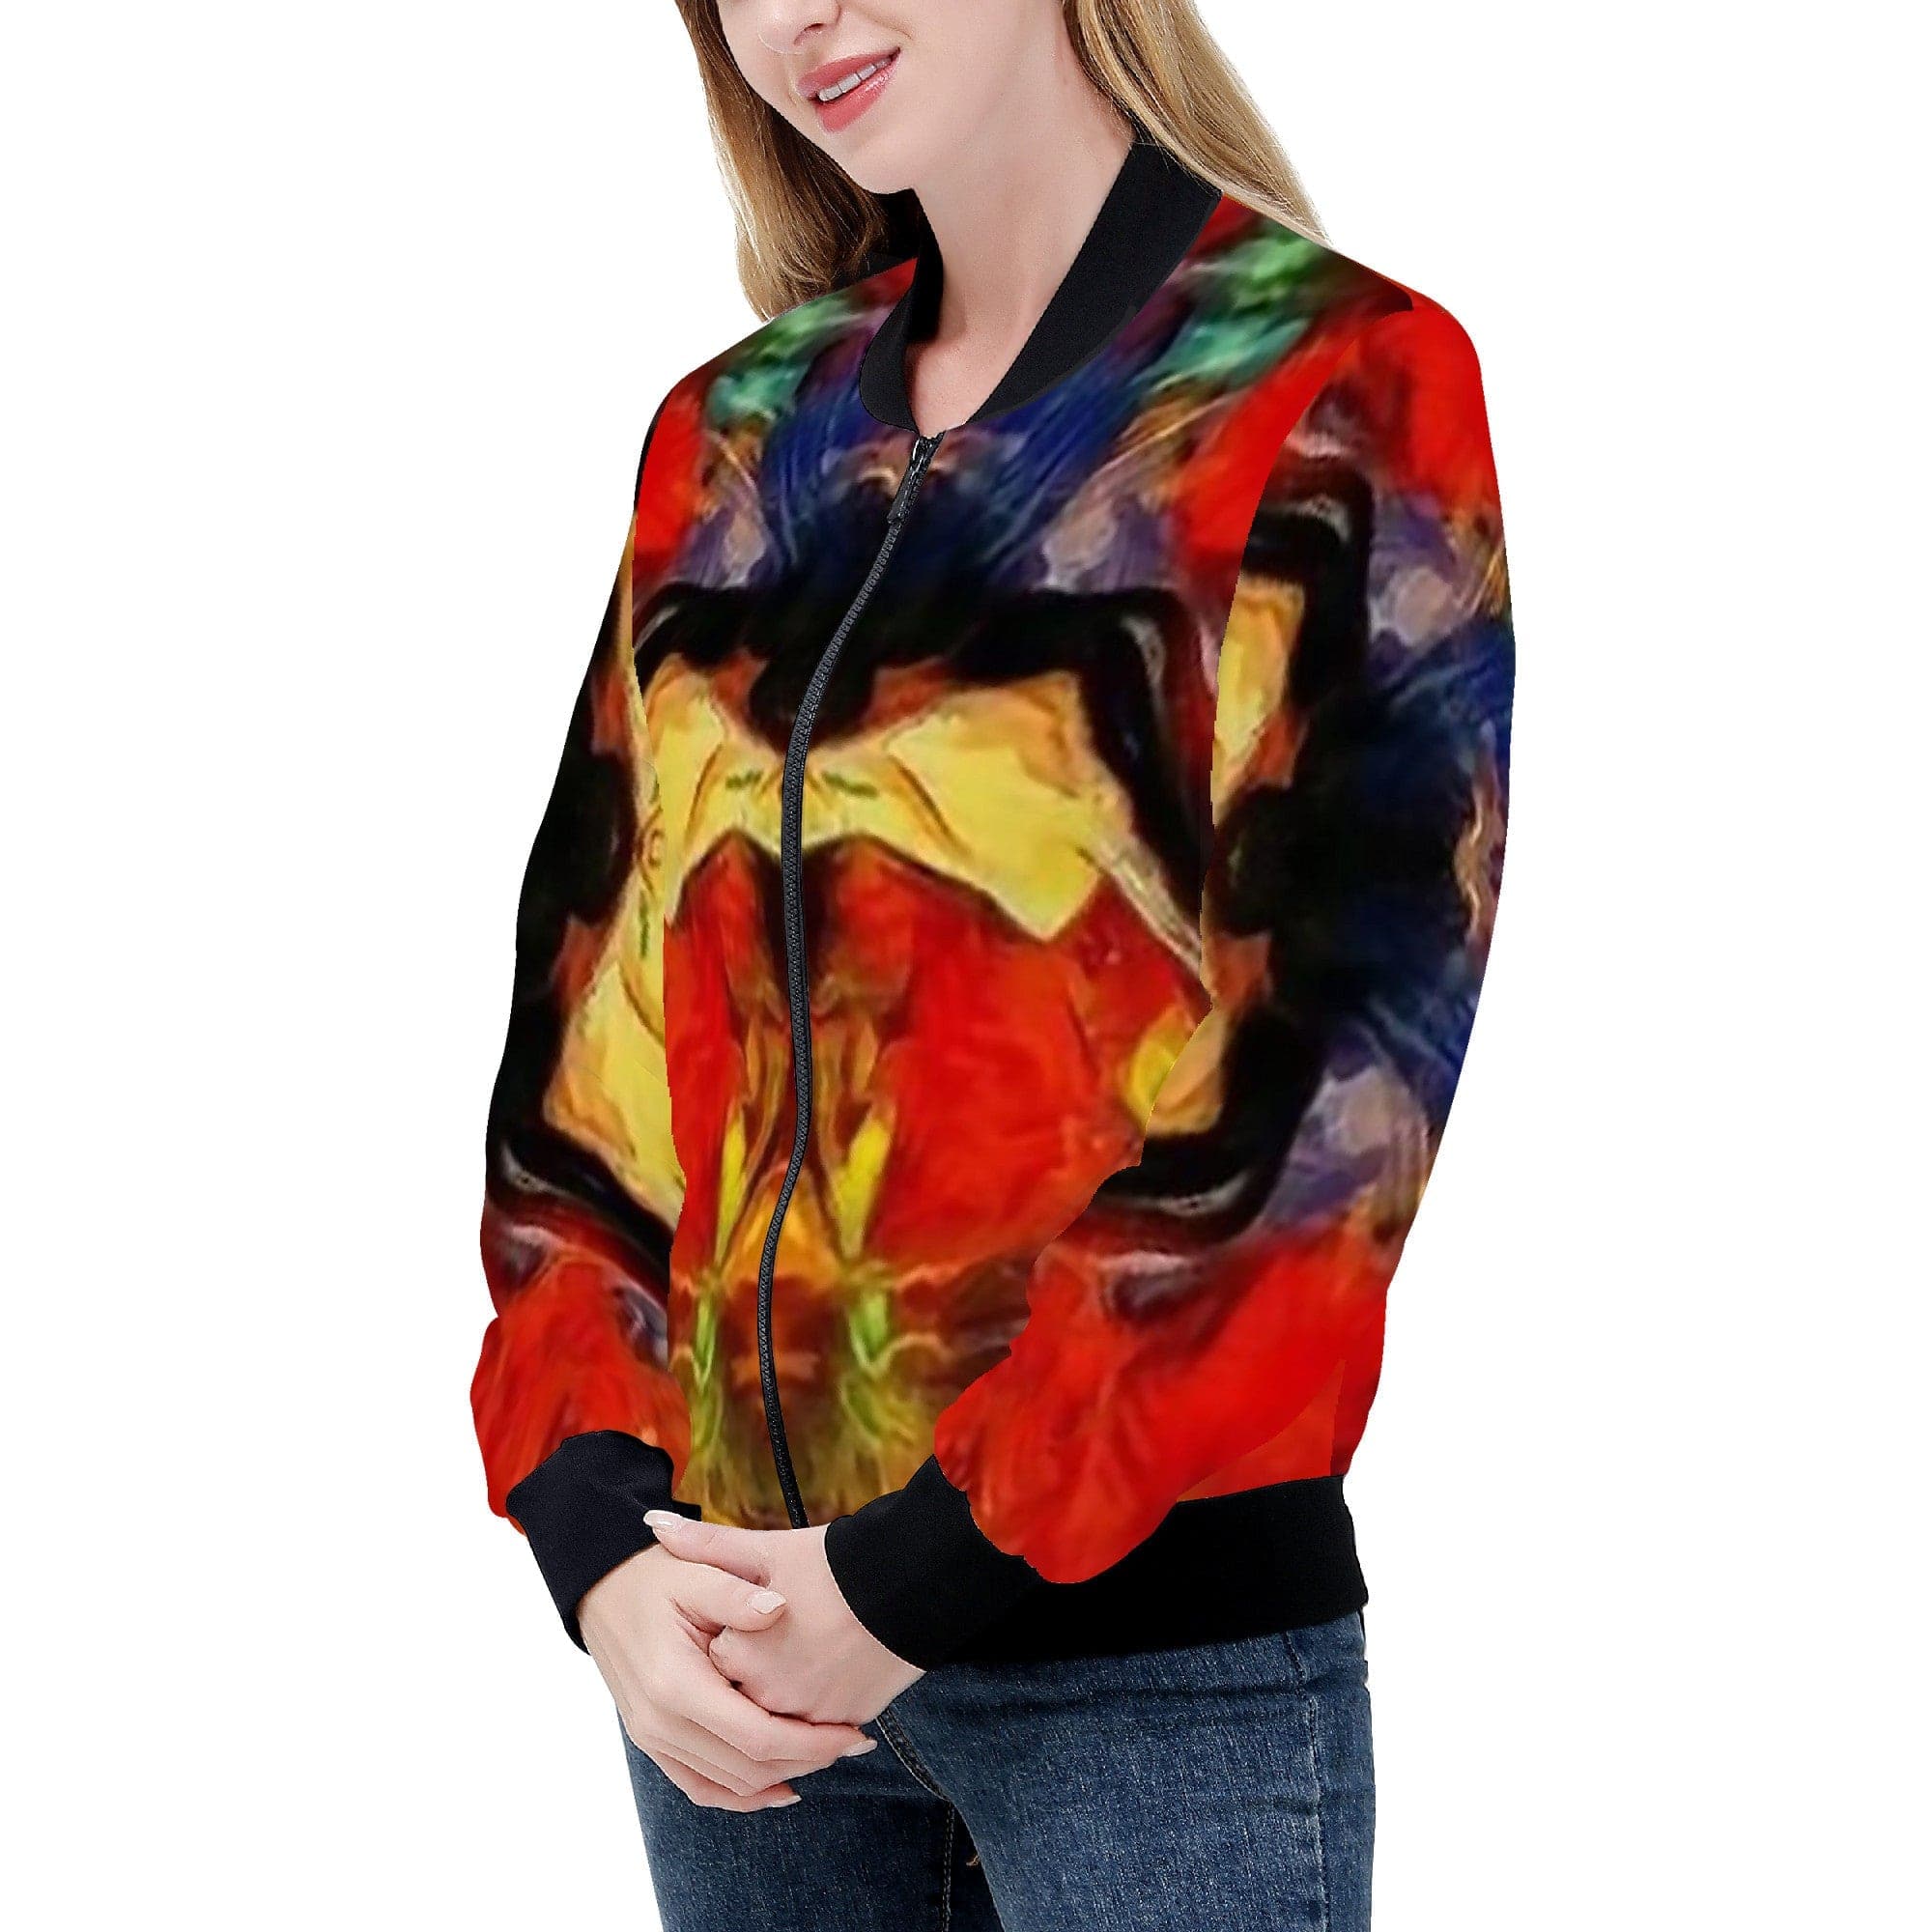 Fantastic Red with Yellow Artistic Pattern Women's Bomber Jacket by SENSUS STUDIO